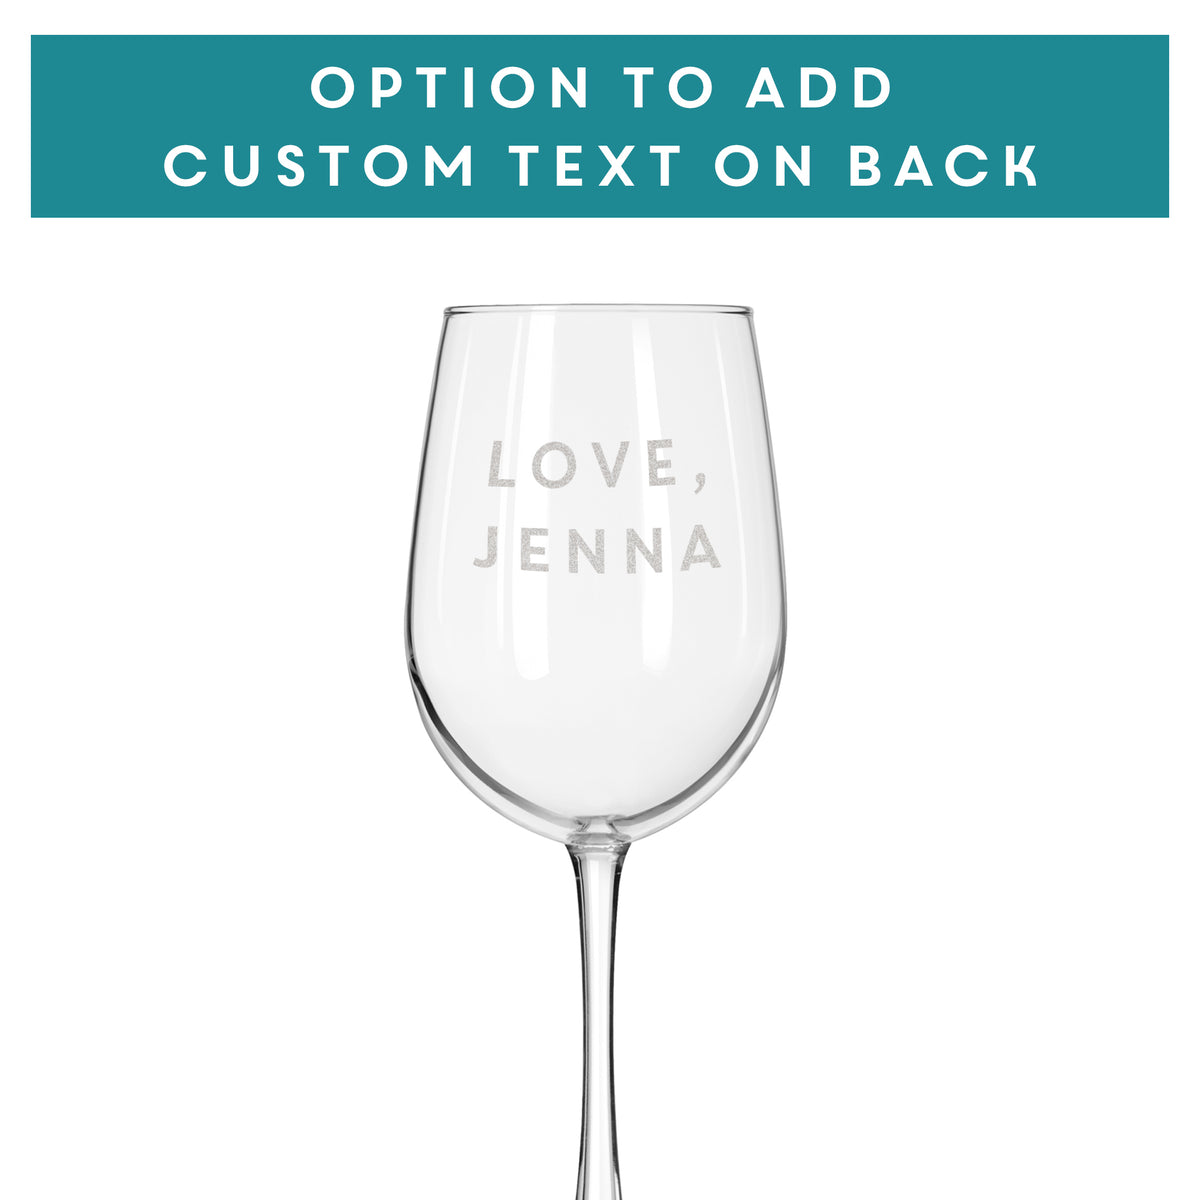 Persian Cat Wine Glass with complimentary personalization - Design Imagery  Engraving